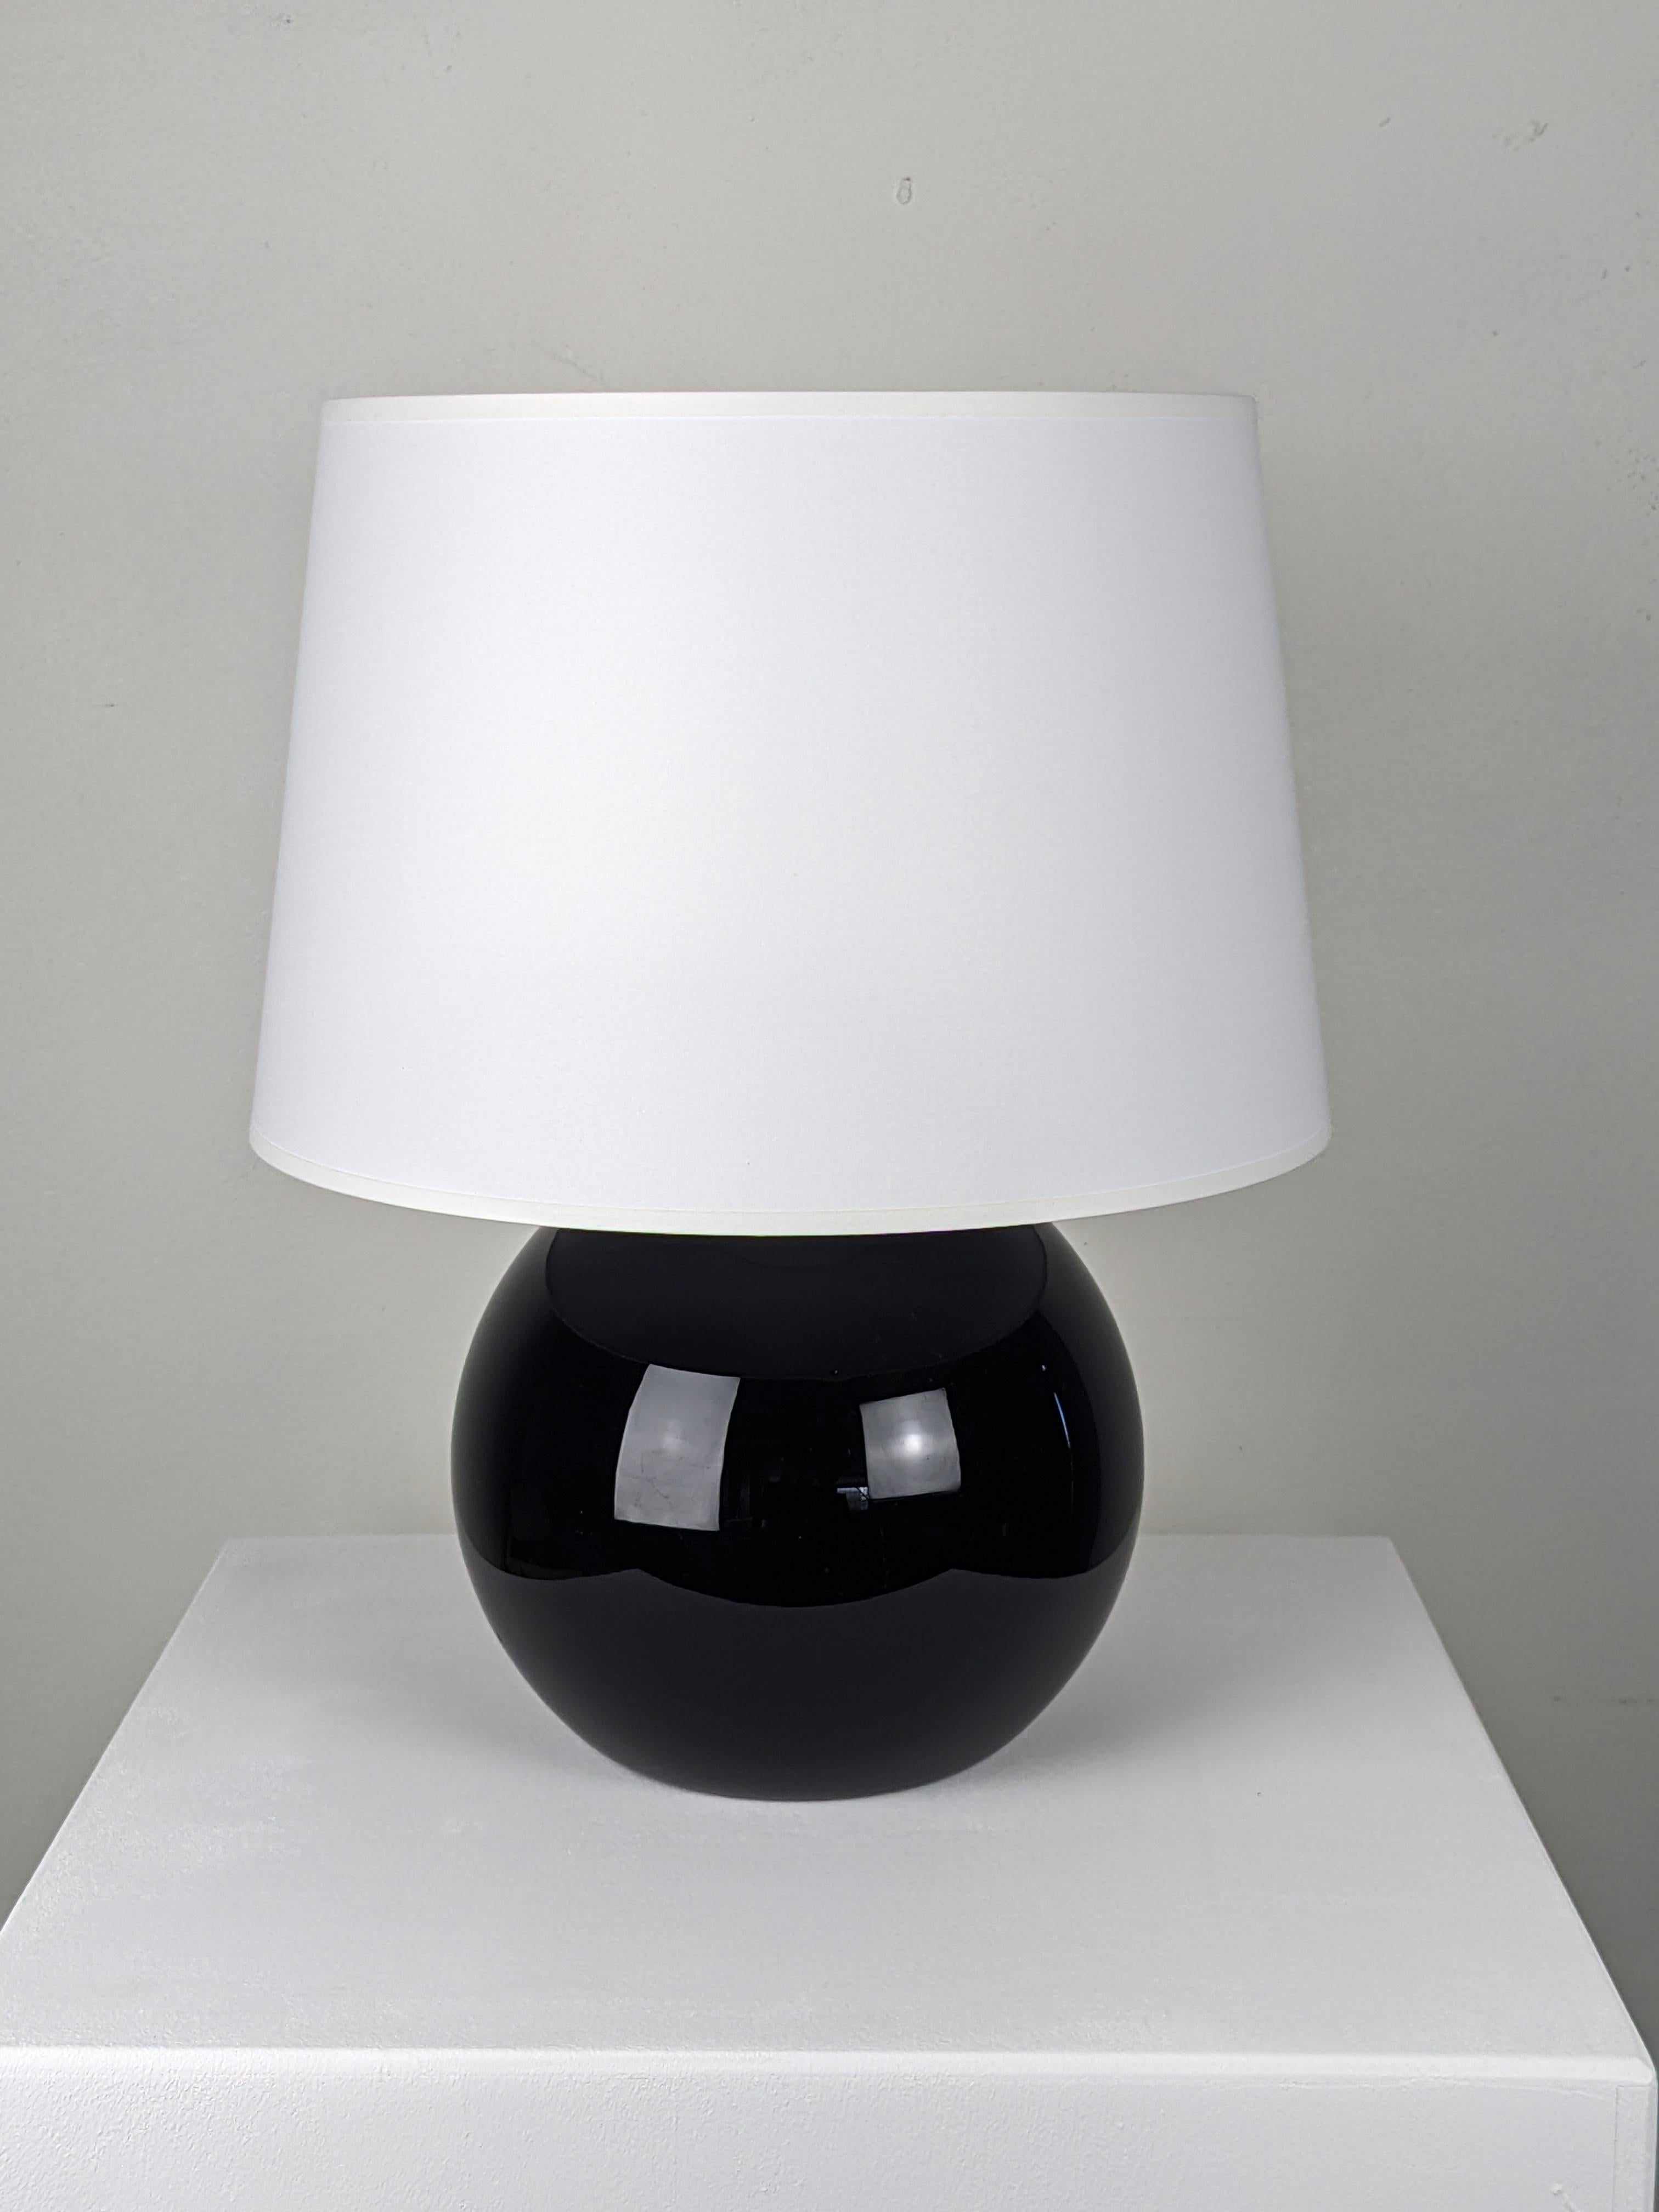 Table lamp by french designer Jacques Adnet.
Black opaline glass with brass details, fabric shade.
Made in France in the 1930s.

Nice Art Deco table lamp.

1x B22 socket and EU plug.

Measurements without shade: H 24 cm, D 20 cm